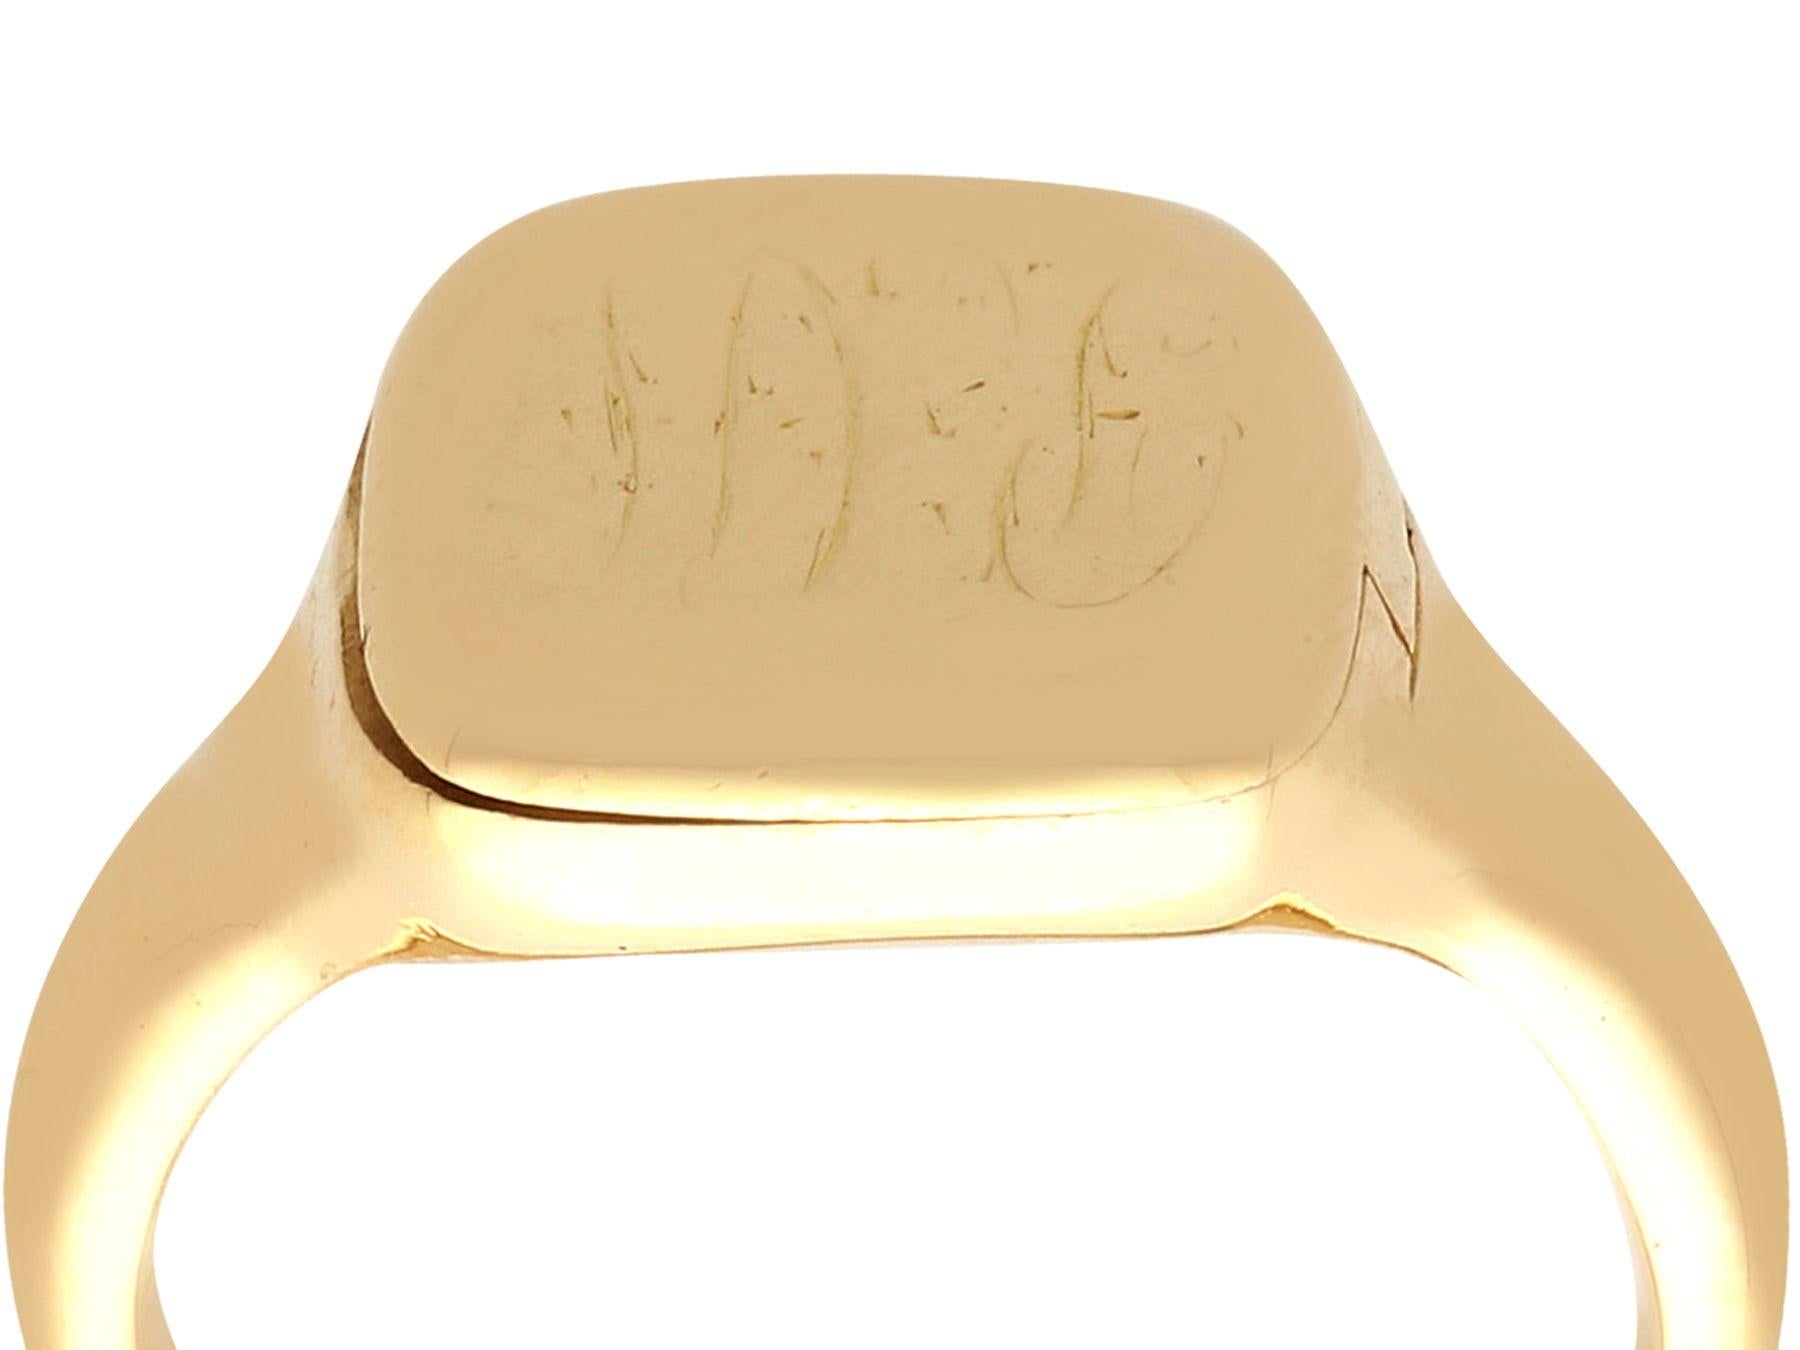 An impressive 18 karat yellow gold signet ring, ornamented with a hidden enamel compartment; part of our diverse antique jewelry and estate jewelry collections.

This fine and impressive signet ring has been crafted in 18k yellow gold.

The rounded